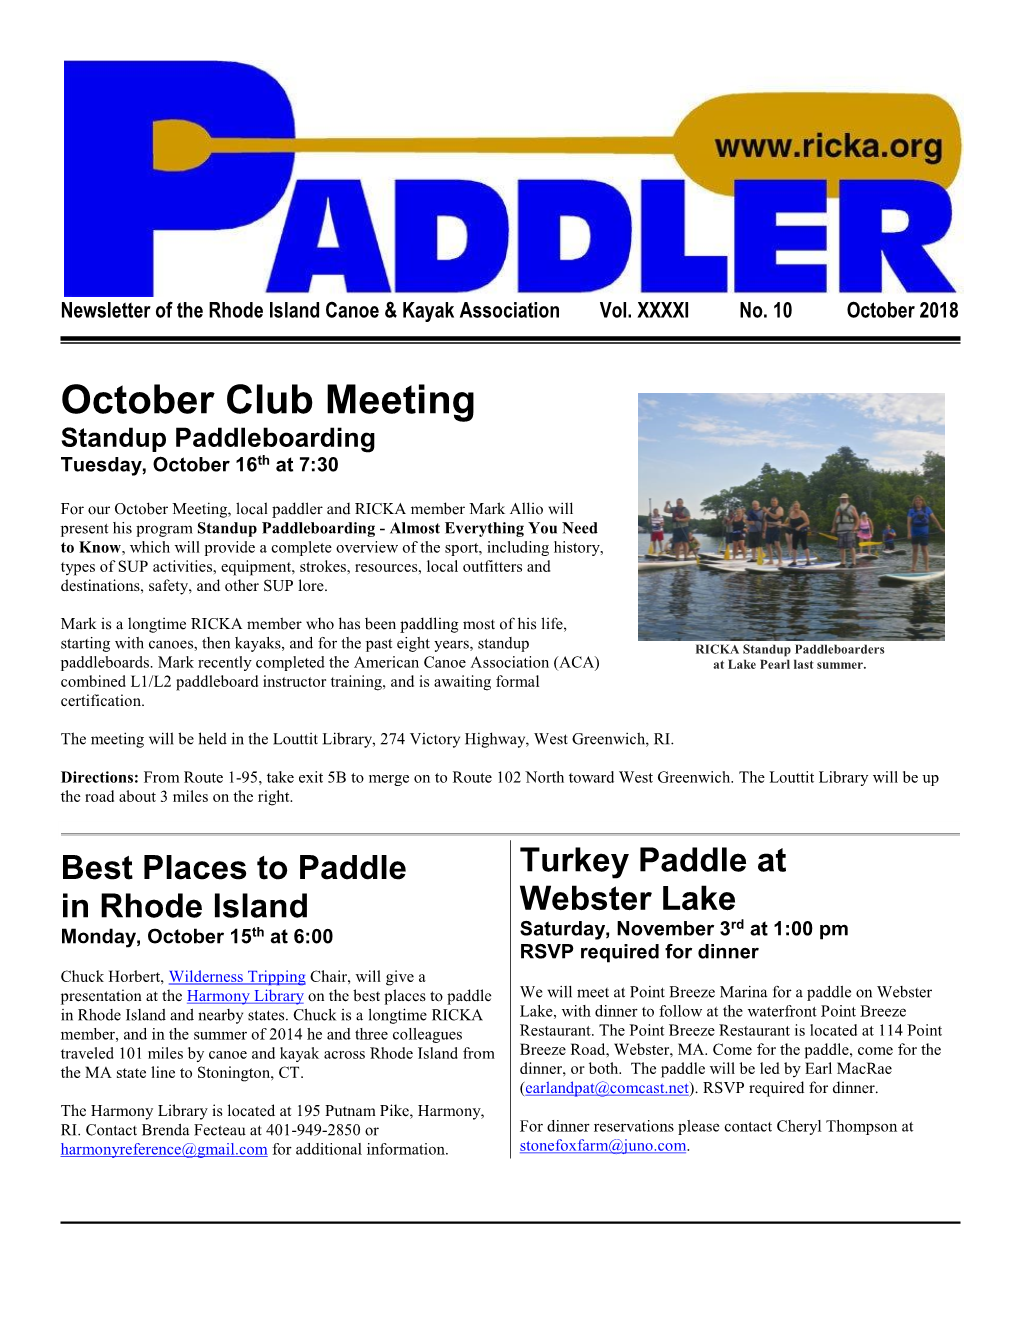 October Club Meeting Standup Paddleboarding Tuesday, October 16Th at 7:30